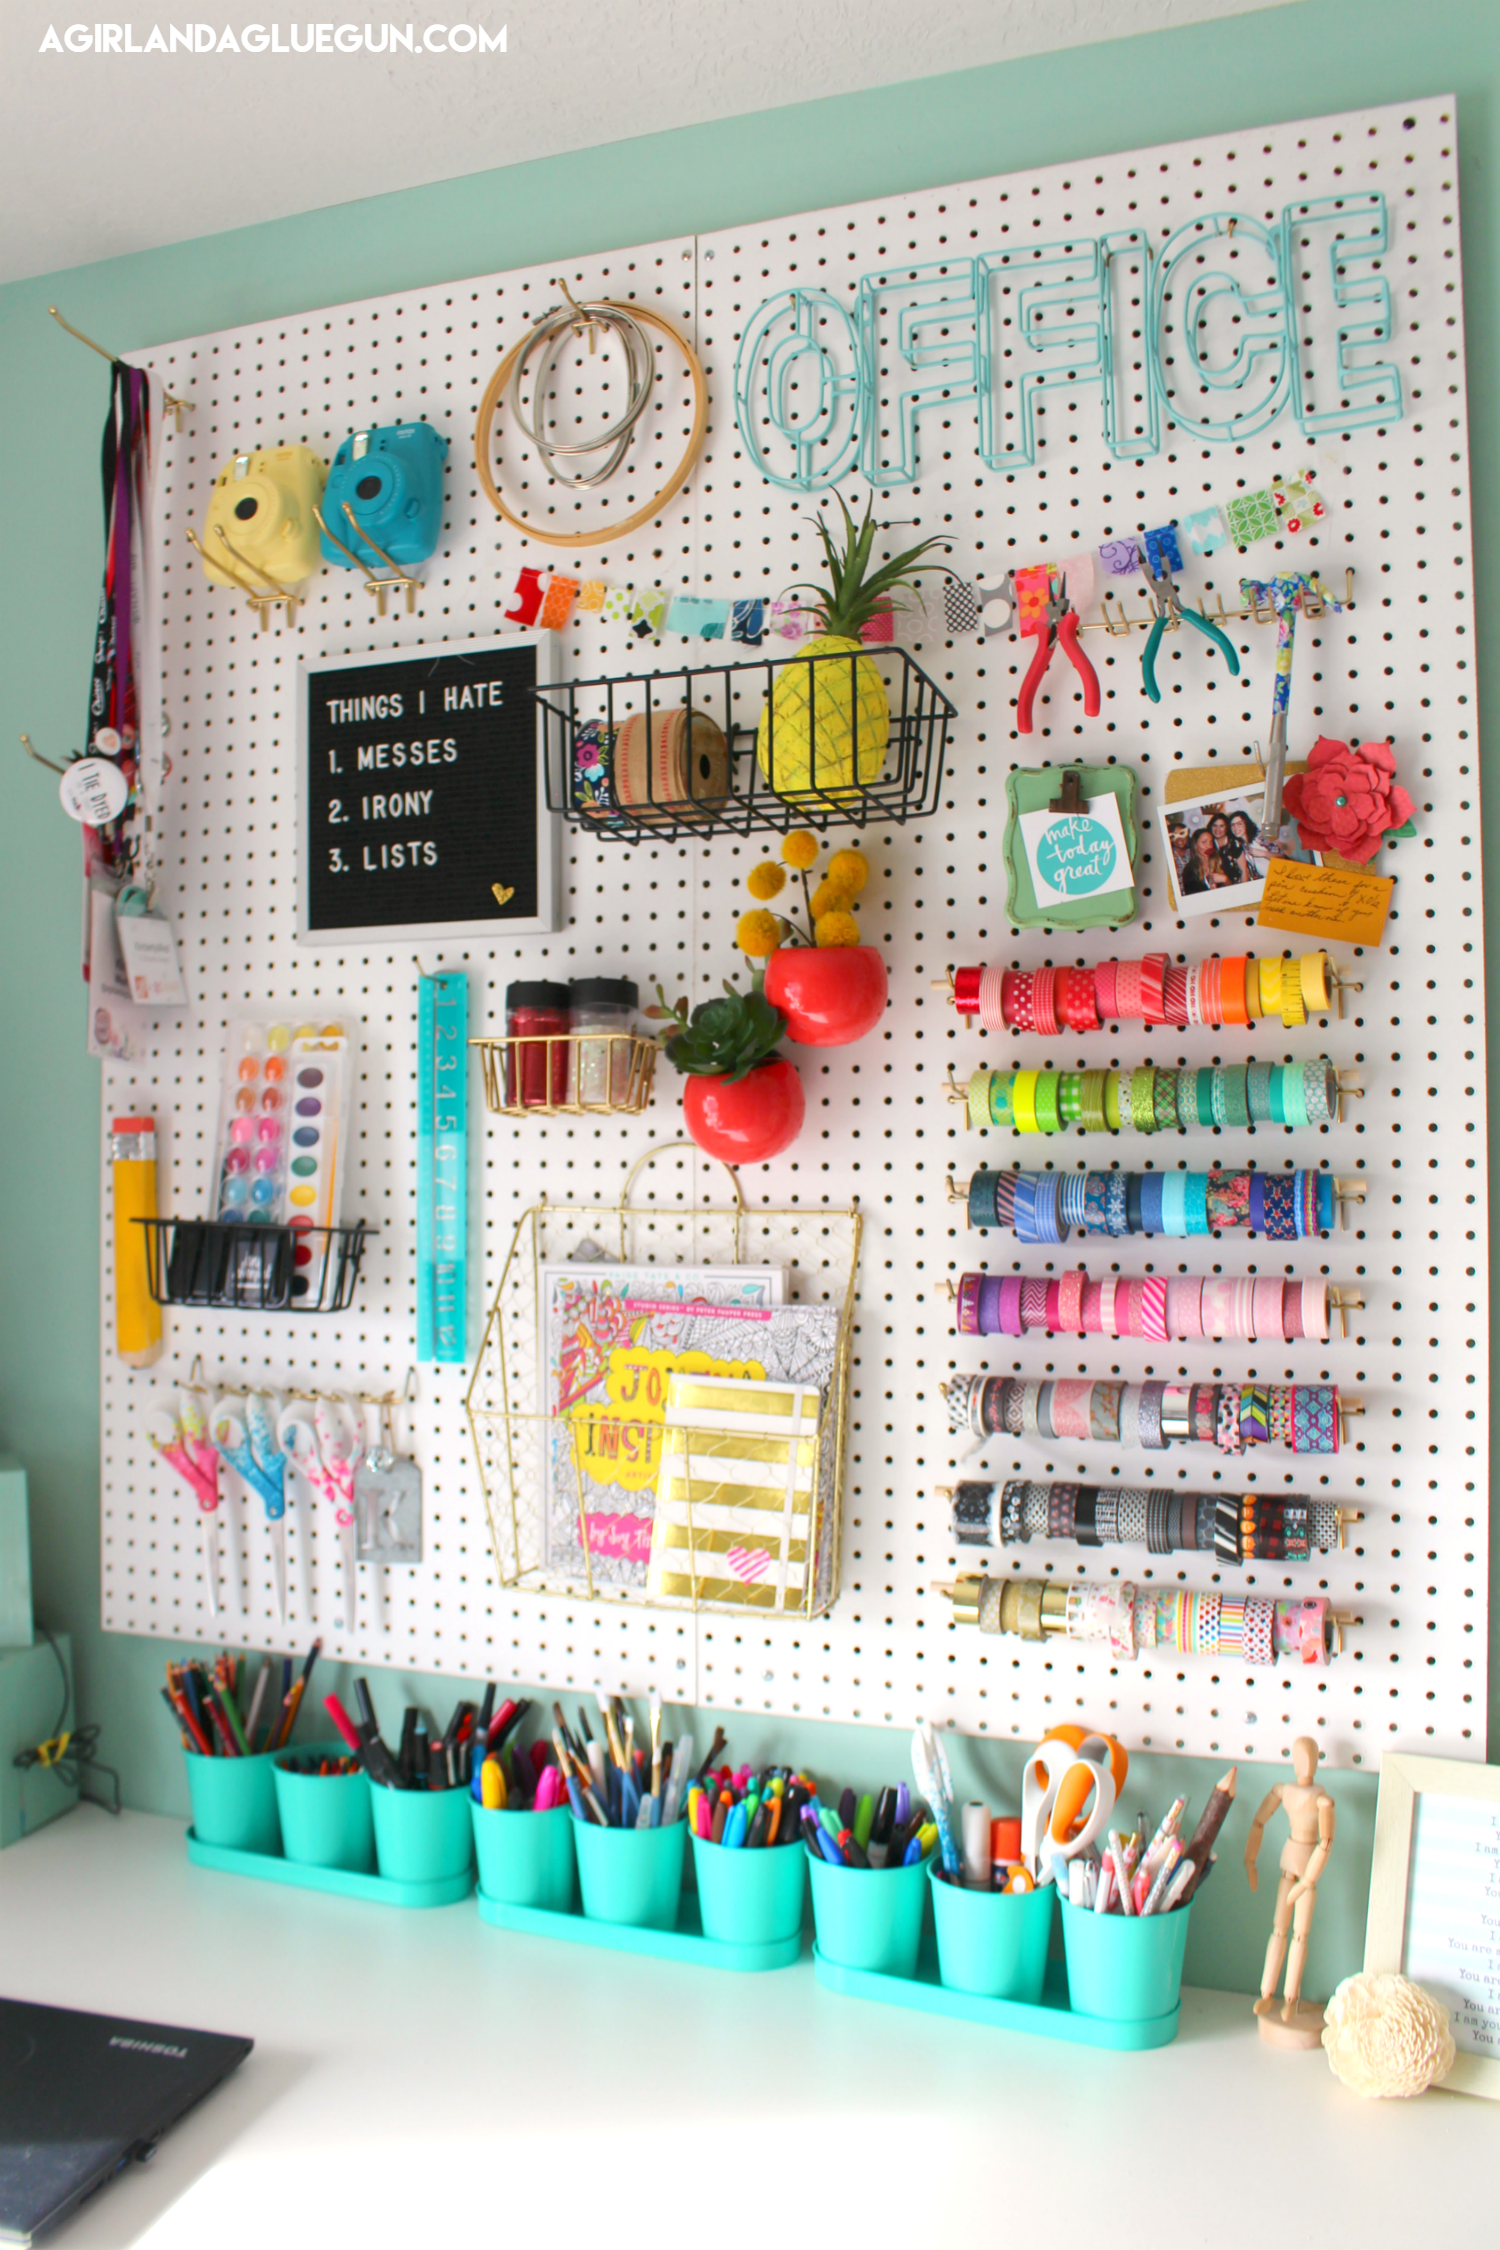 over 30 ways to organize with a Peg board -   25 pegboard crafts organization
 ideas